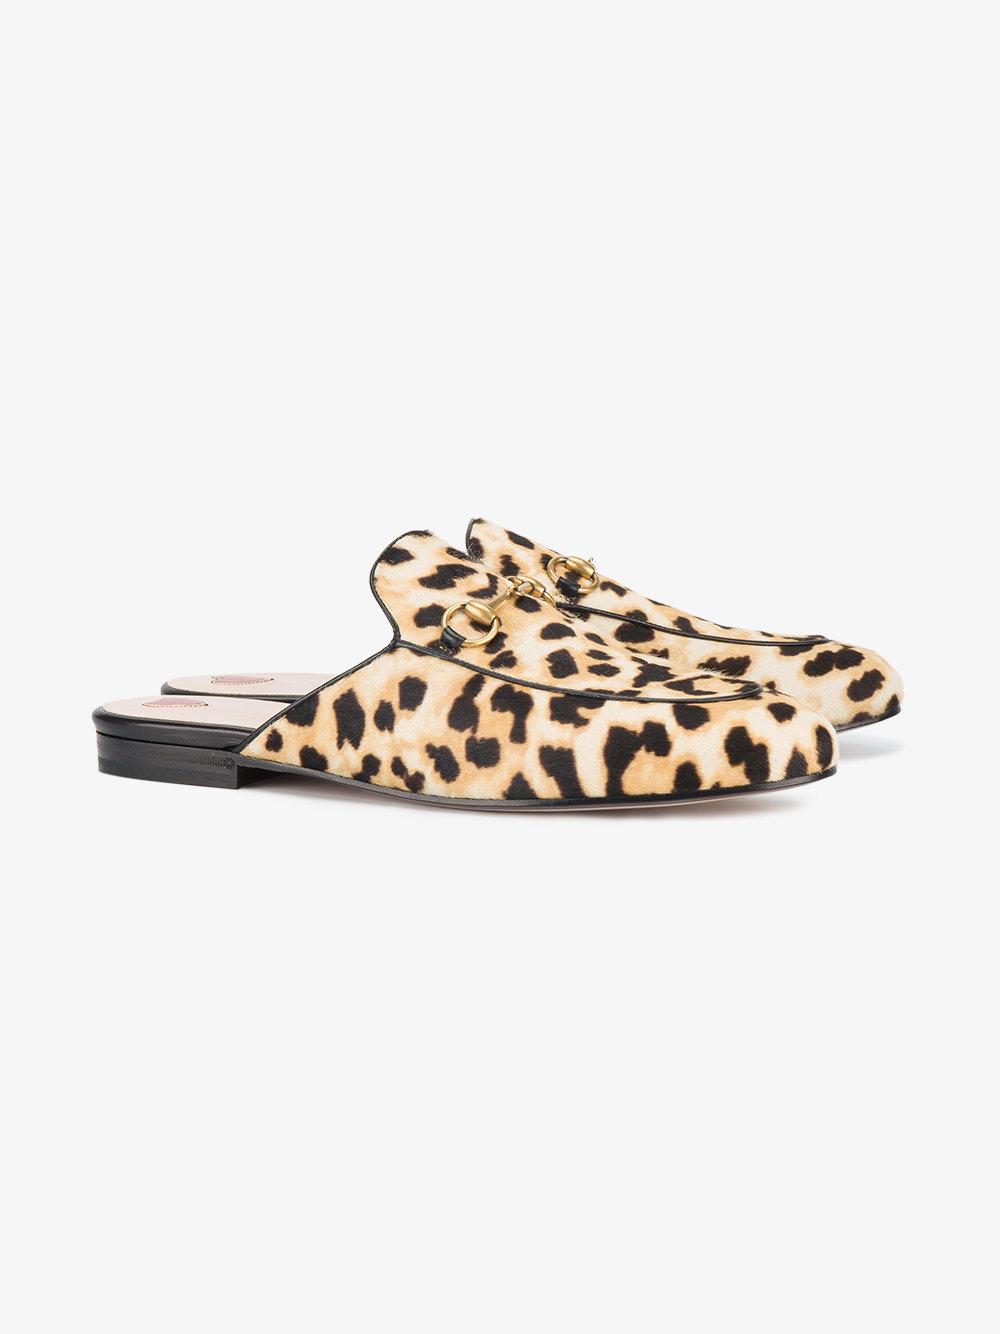 Gucci Leopard Princetown Pony Mules | Lyst